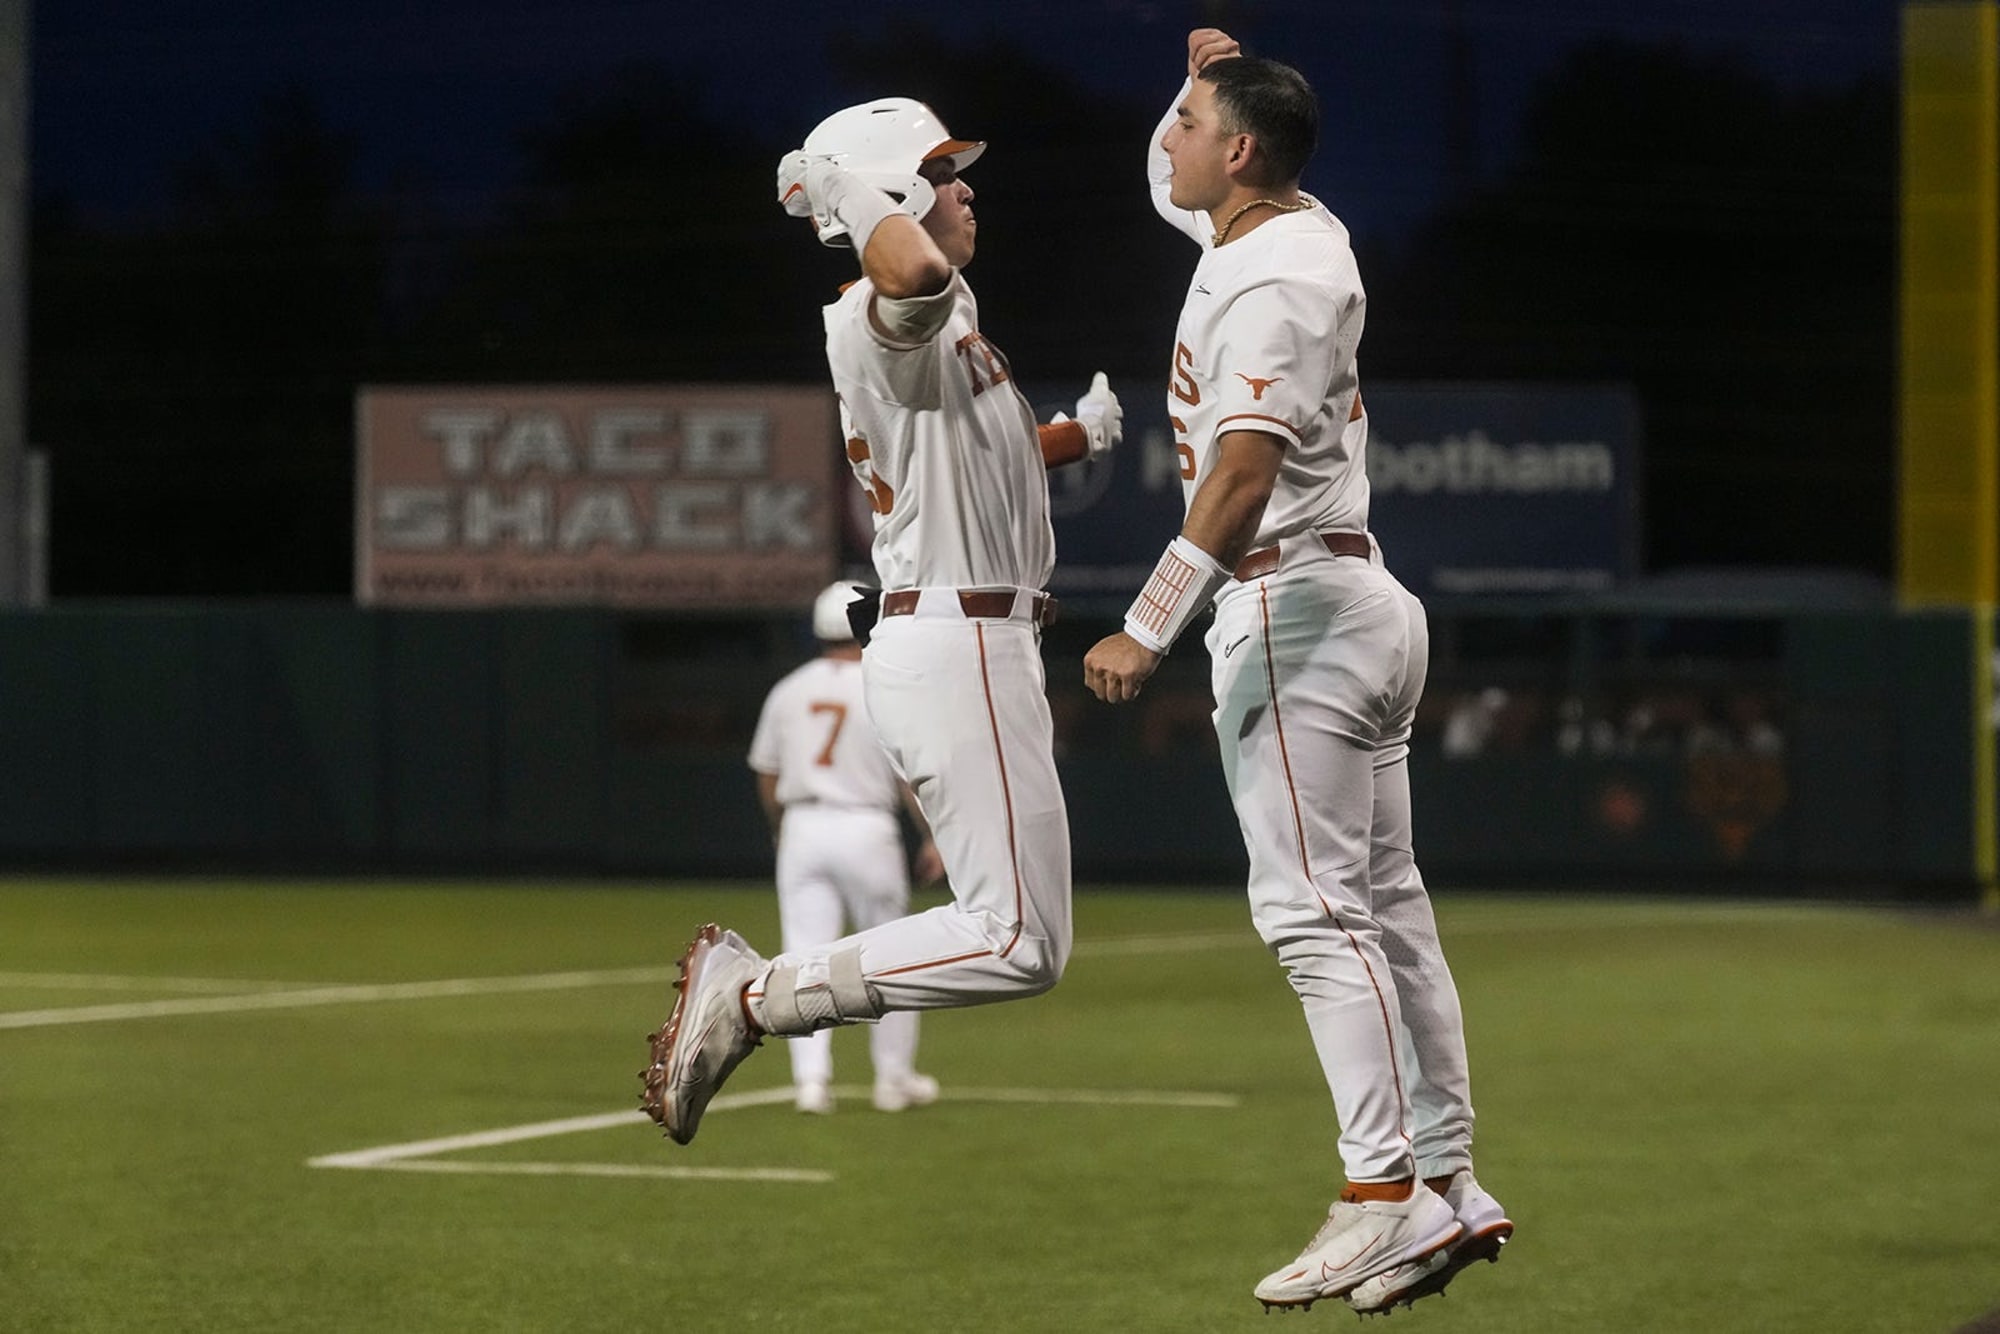 Coral Gables baseball regional is set - State of The U